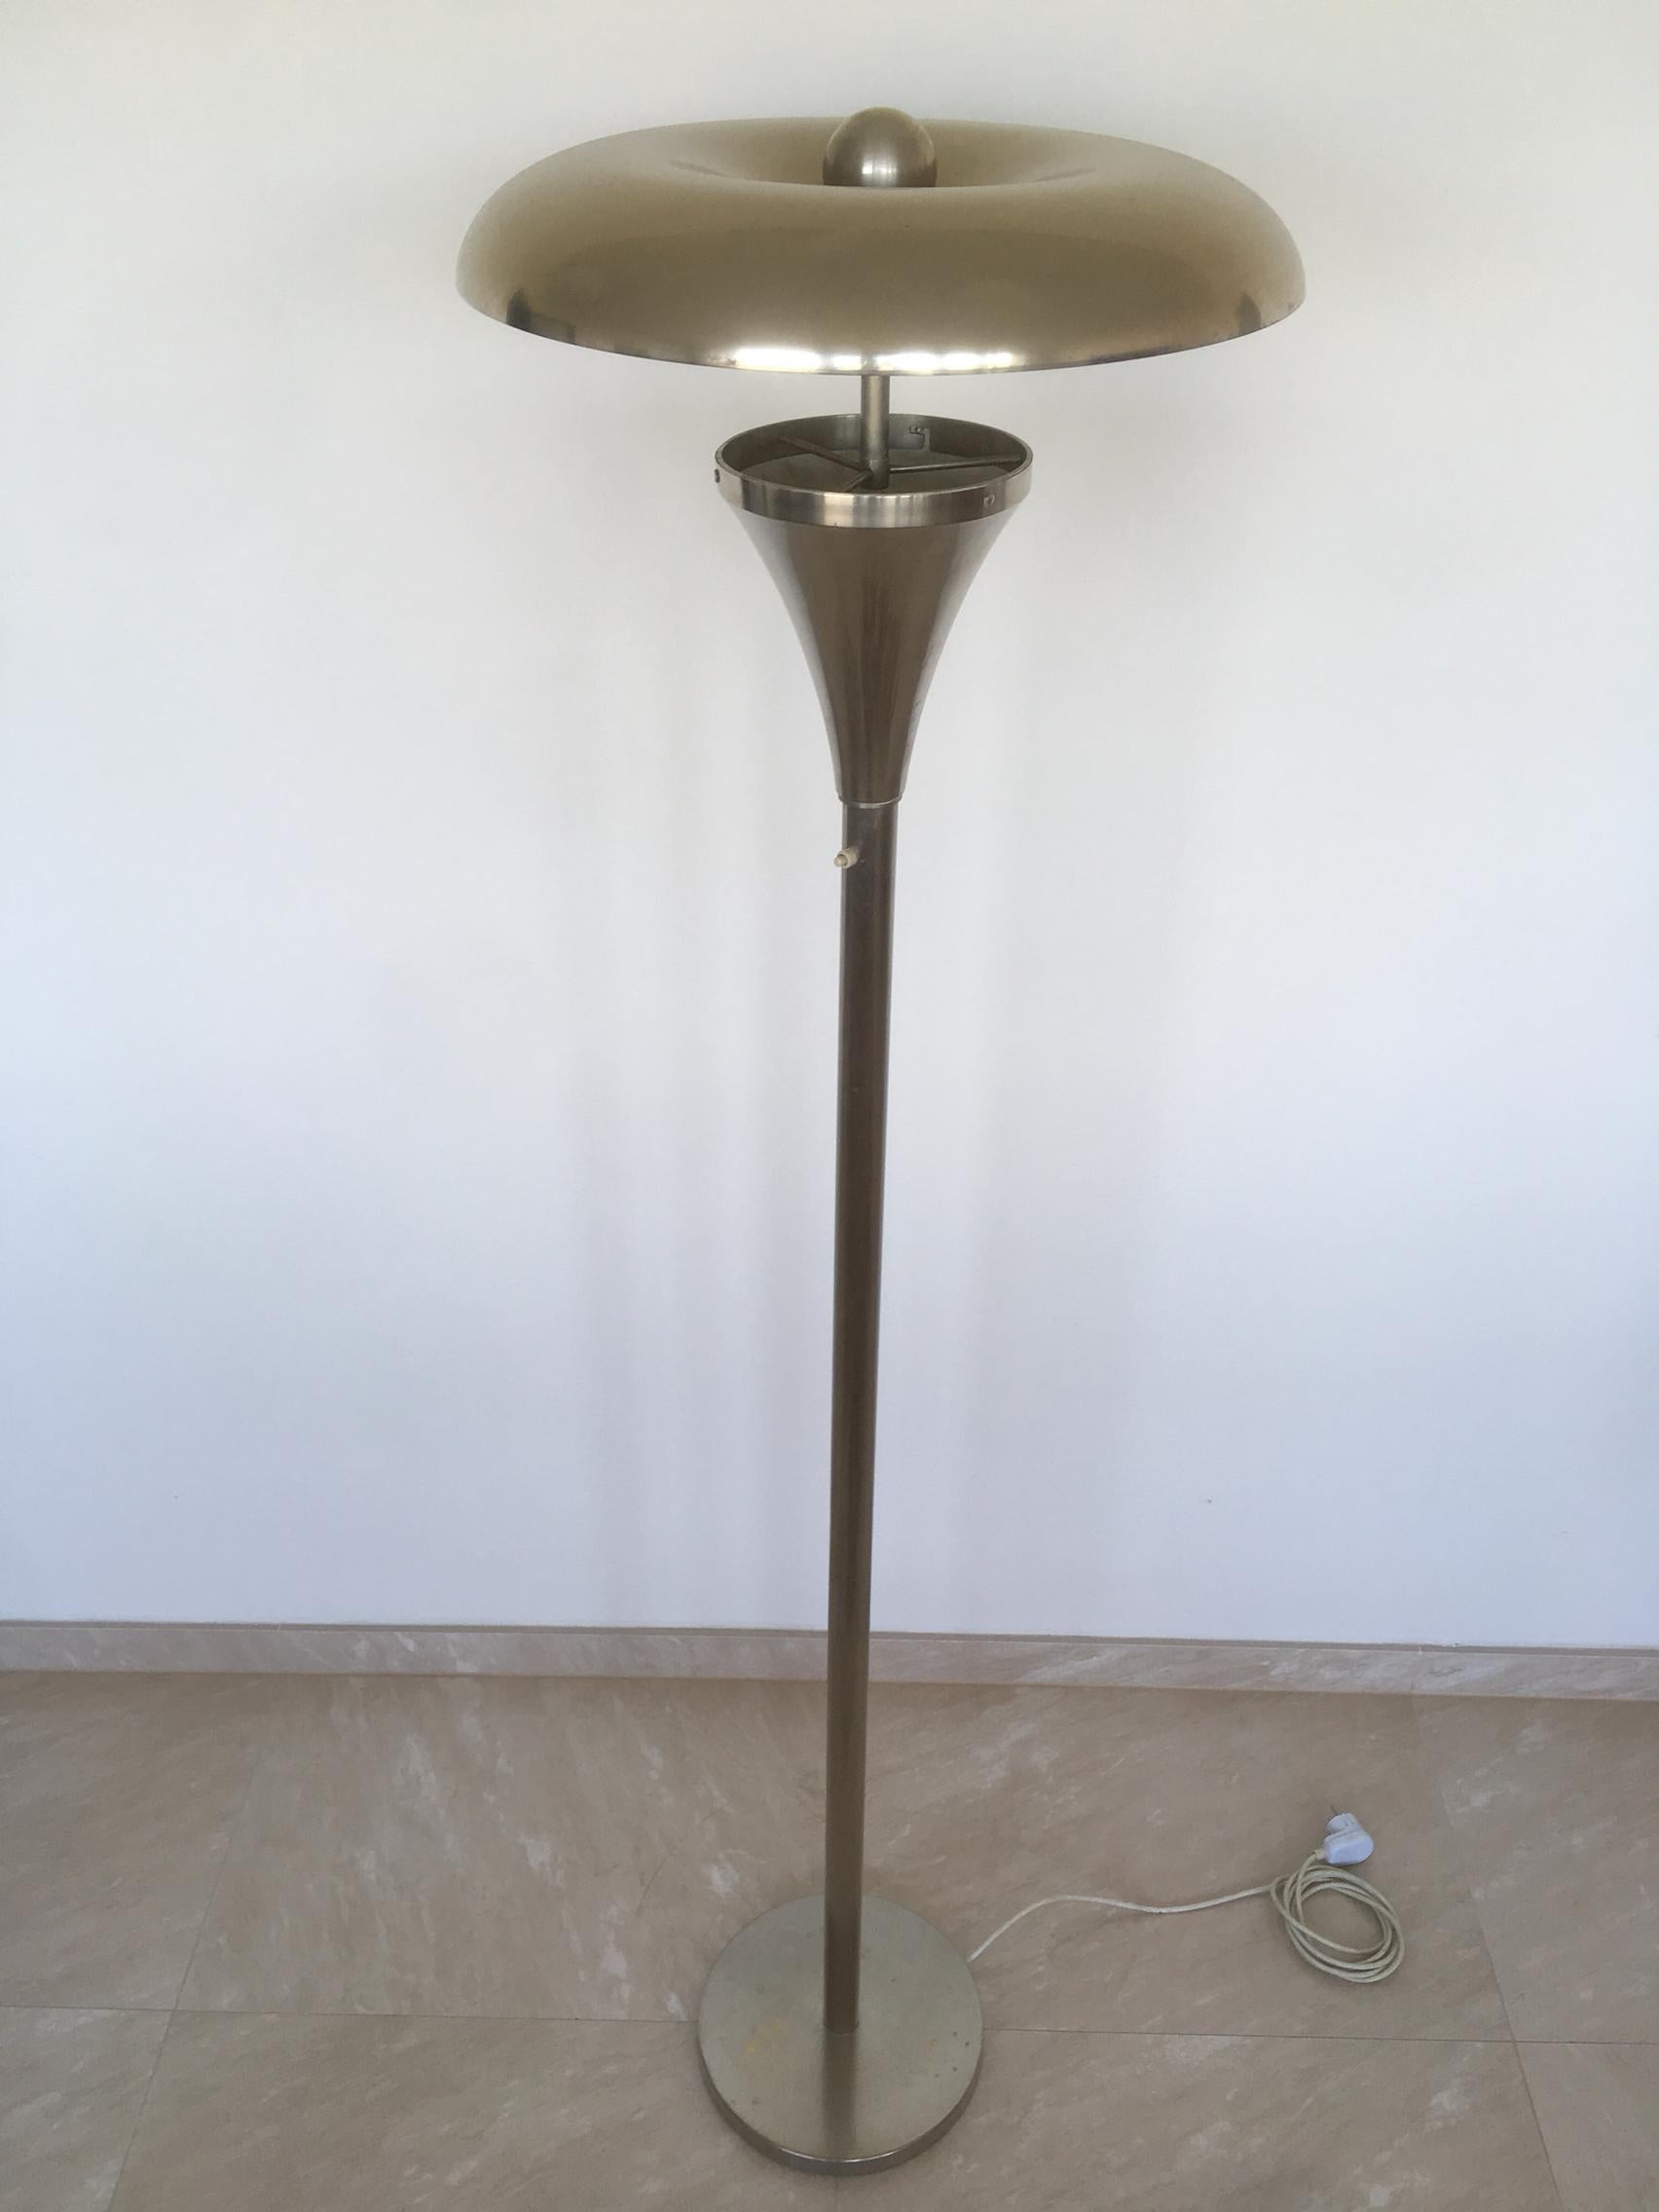 - Very rare floor lamp
- Functionalism, Bauhaus
- Simple and clean design
- Manufacturer: Frantisek Anyz
- Czechoslovakia, 1930s
- Original condition, patina
- Indirect lighting, new electricity.